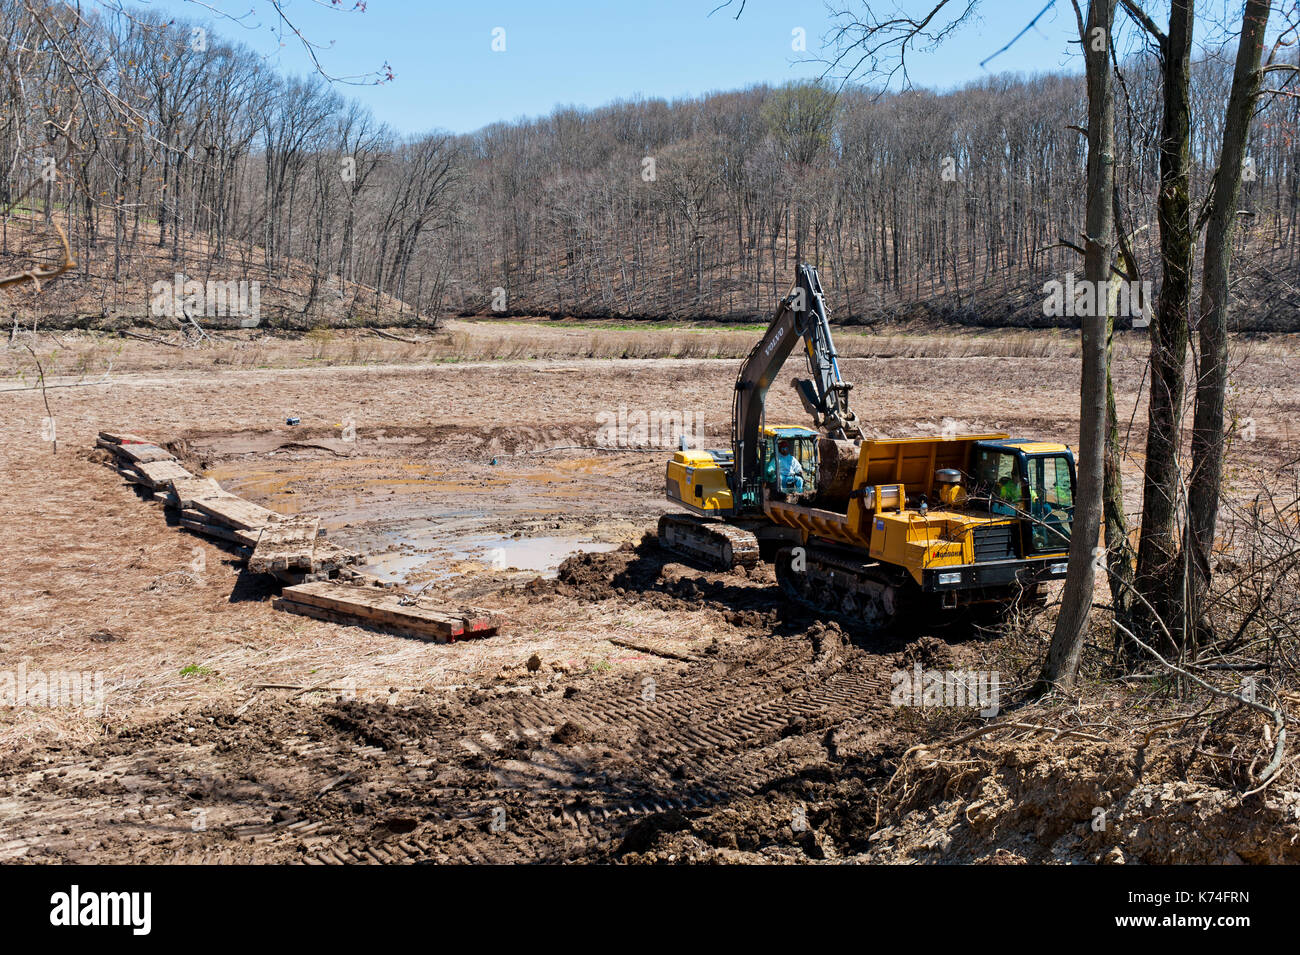 CONSTRUCTION EQUIPMENT REMOVING SEDIMENT FROM DRY LAKE BED OF SPEEDWELL FORGE LAKE, LITITZ PENNSYLVANIA Stock Photo